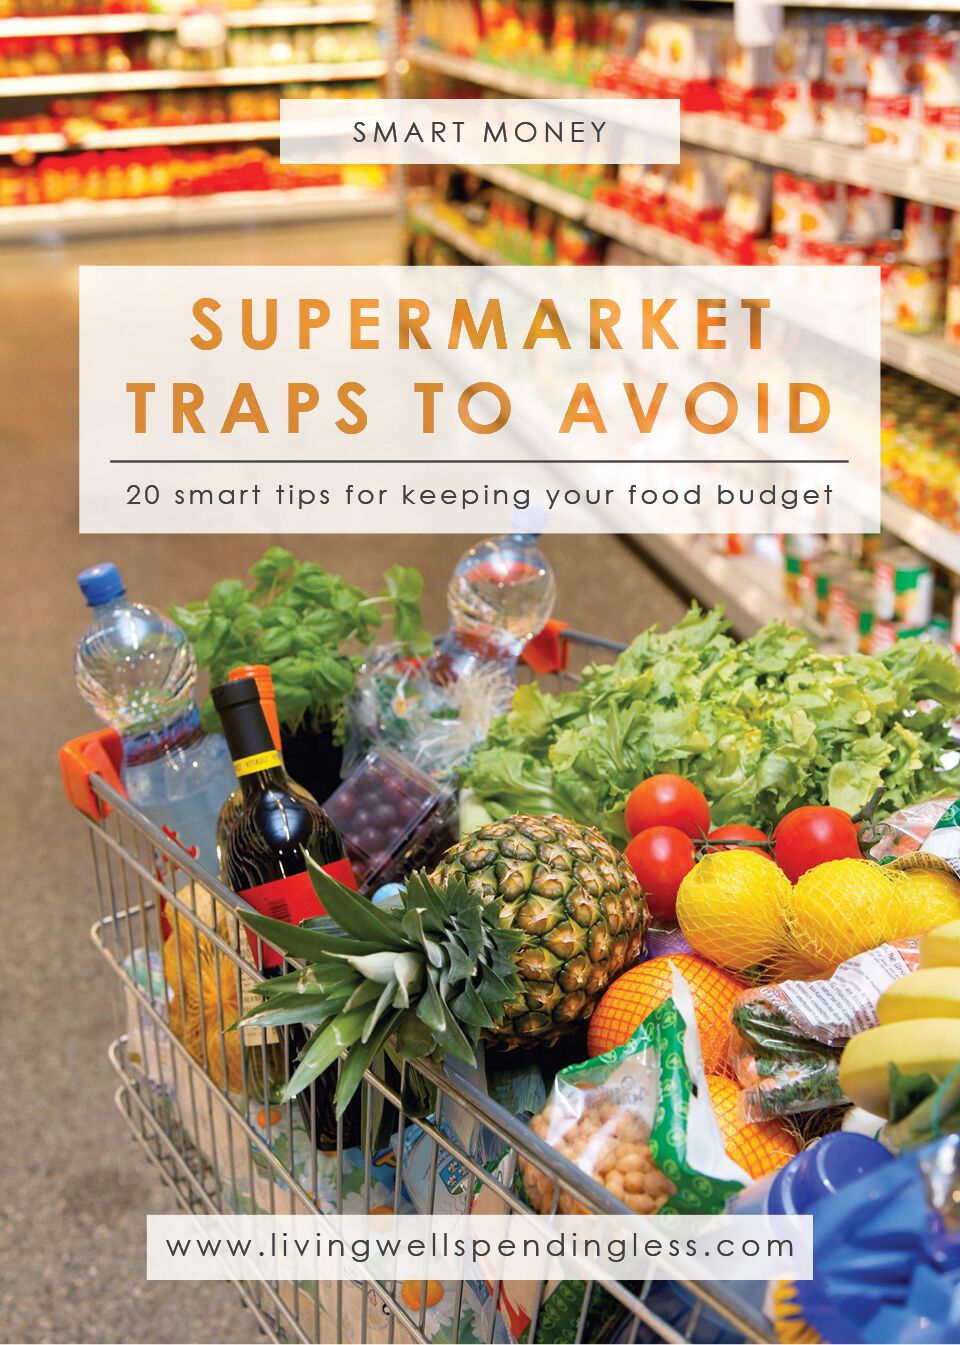 20 Supermarket Traps to Avoid: Smart Tips for Staying On Your Food Budget